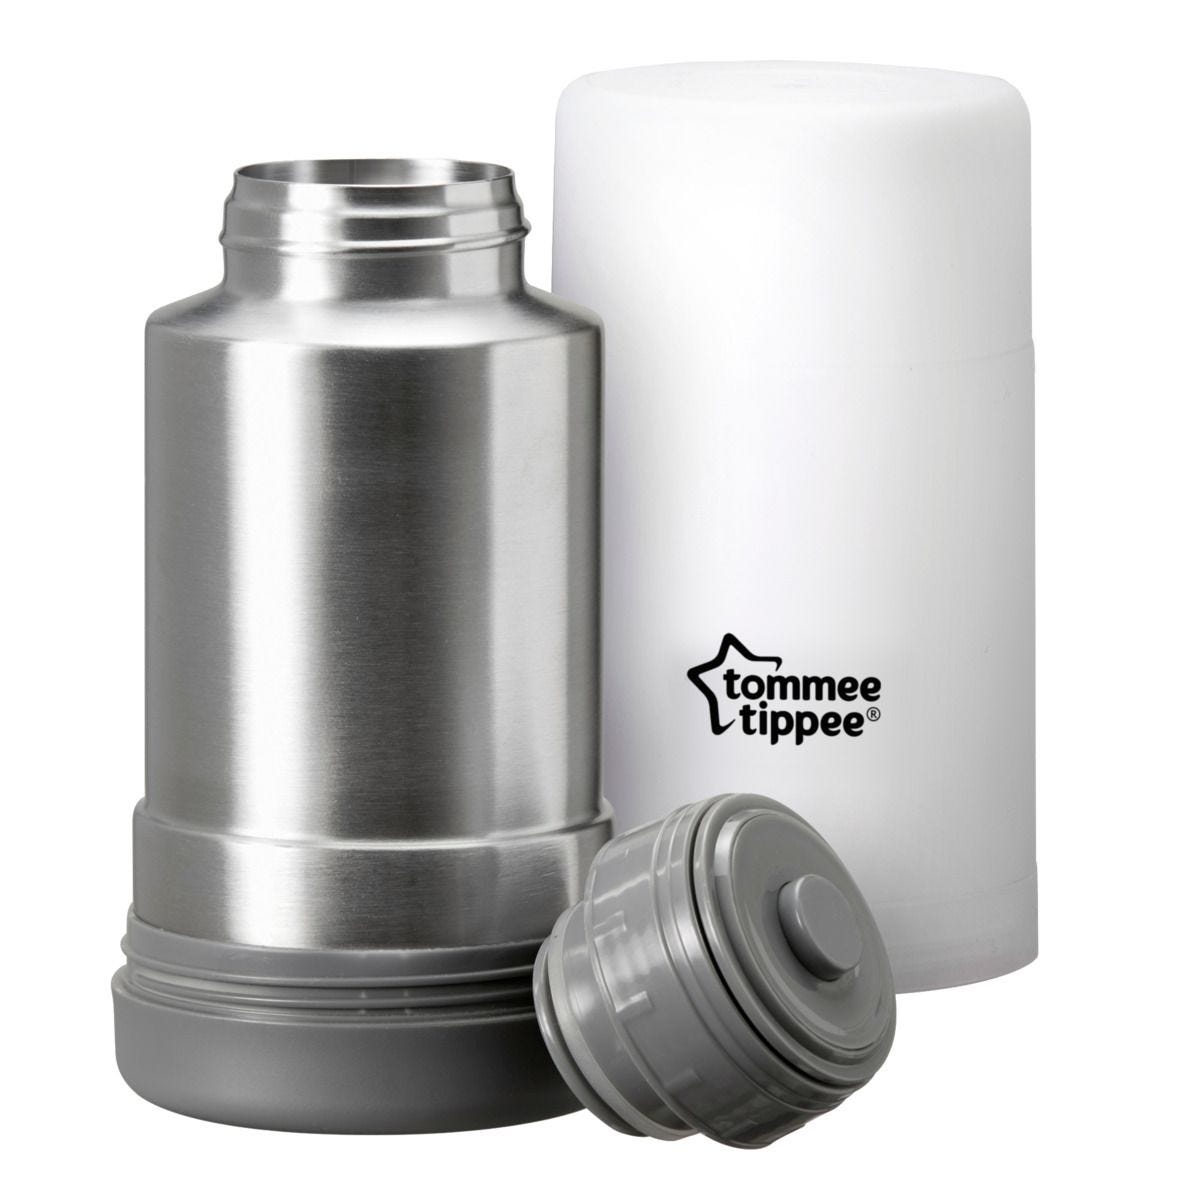 tommee tippee Travel Bottle Warmer Instruction Manual